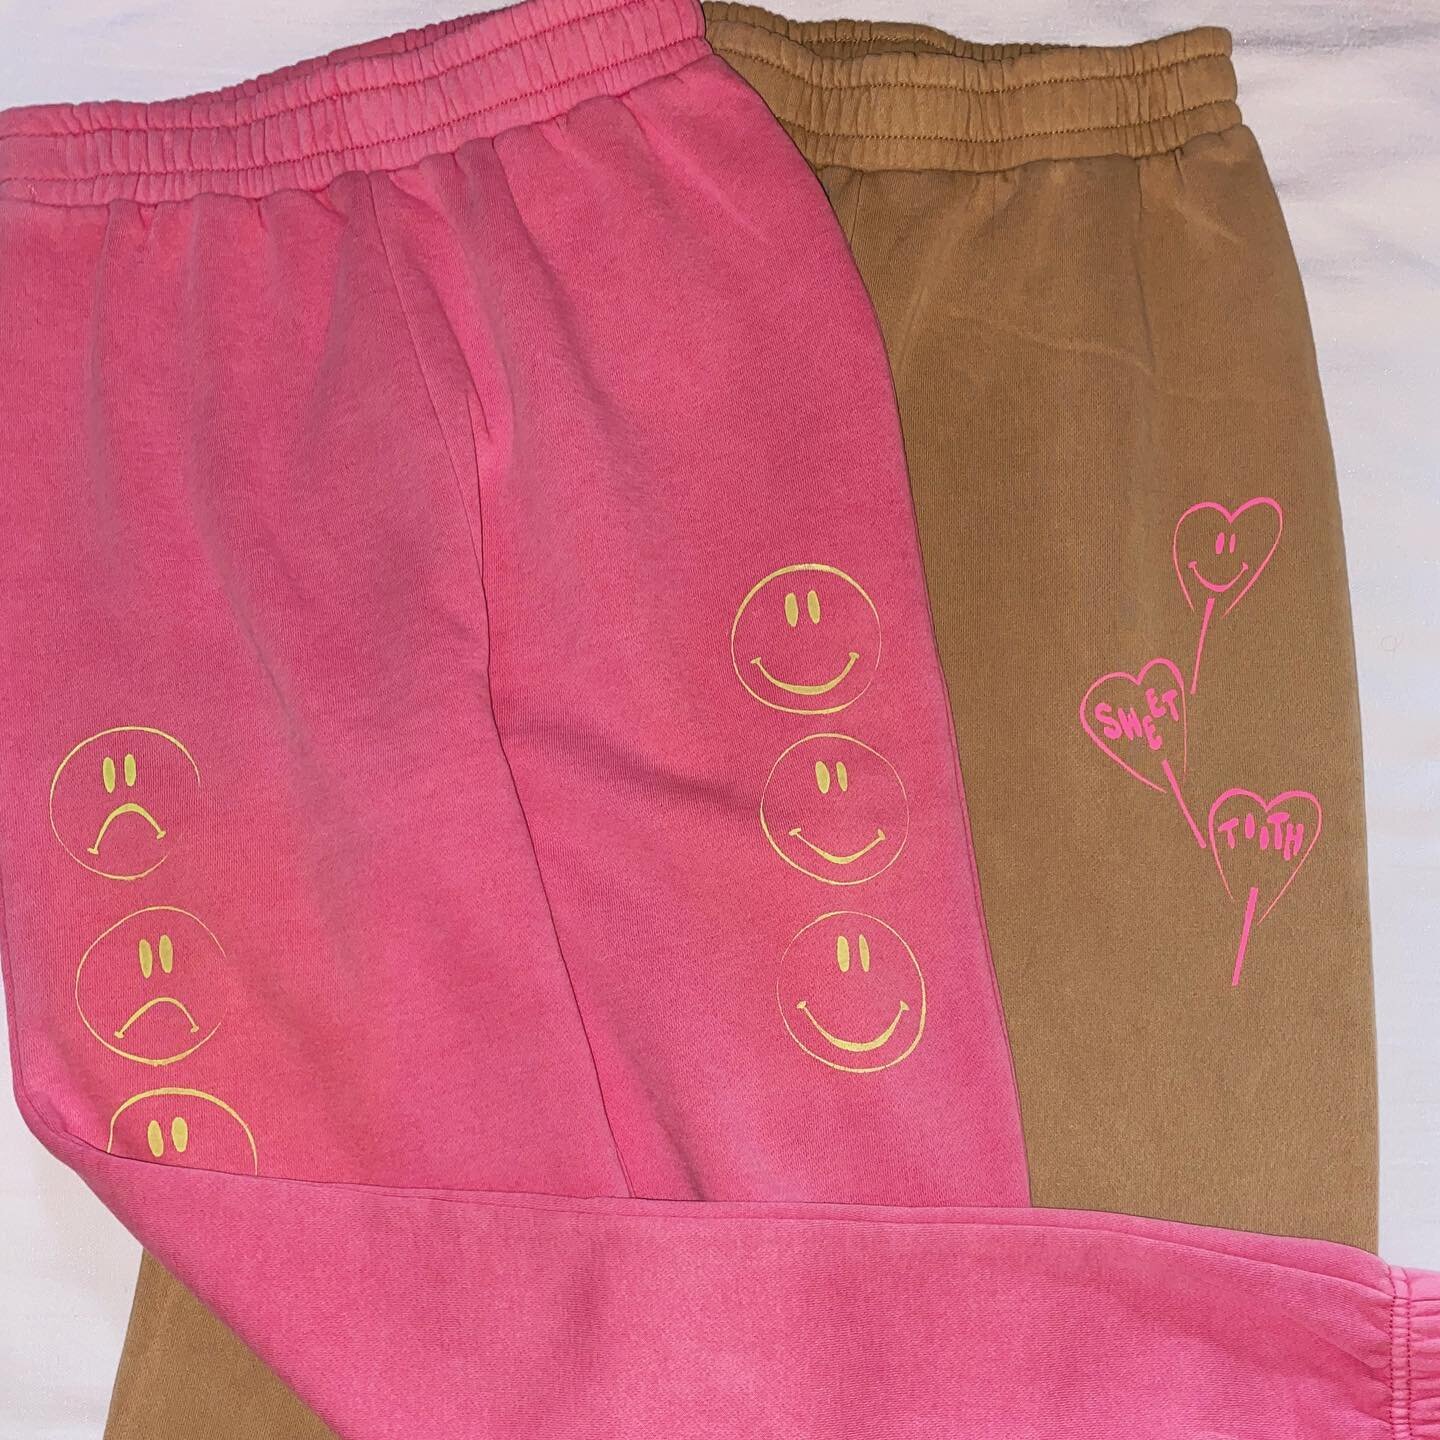 nothing better than a good pair of sweatpants 🤠

some of my ~favorite~ custom designs that I&rsquo;ve done for some of my ~favorite~ ladies @sophiaalevy @babytrinn